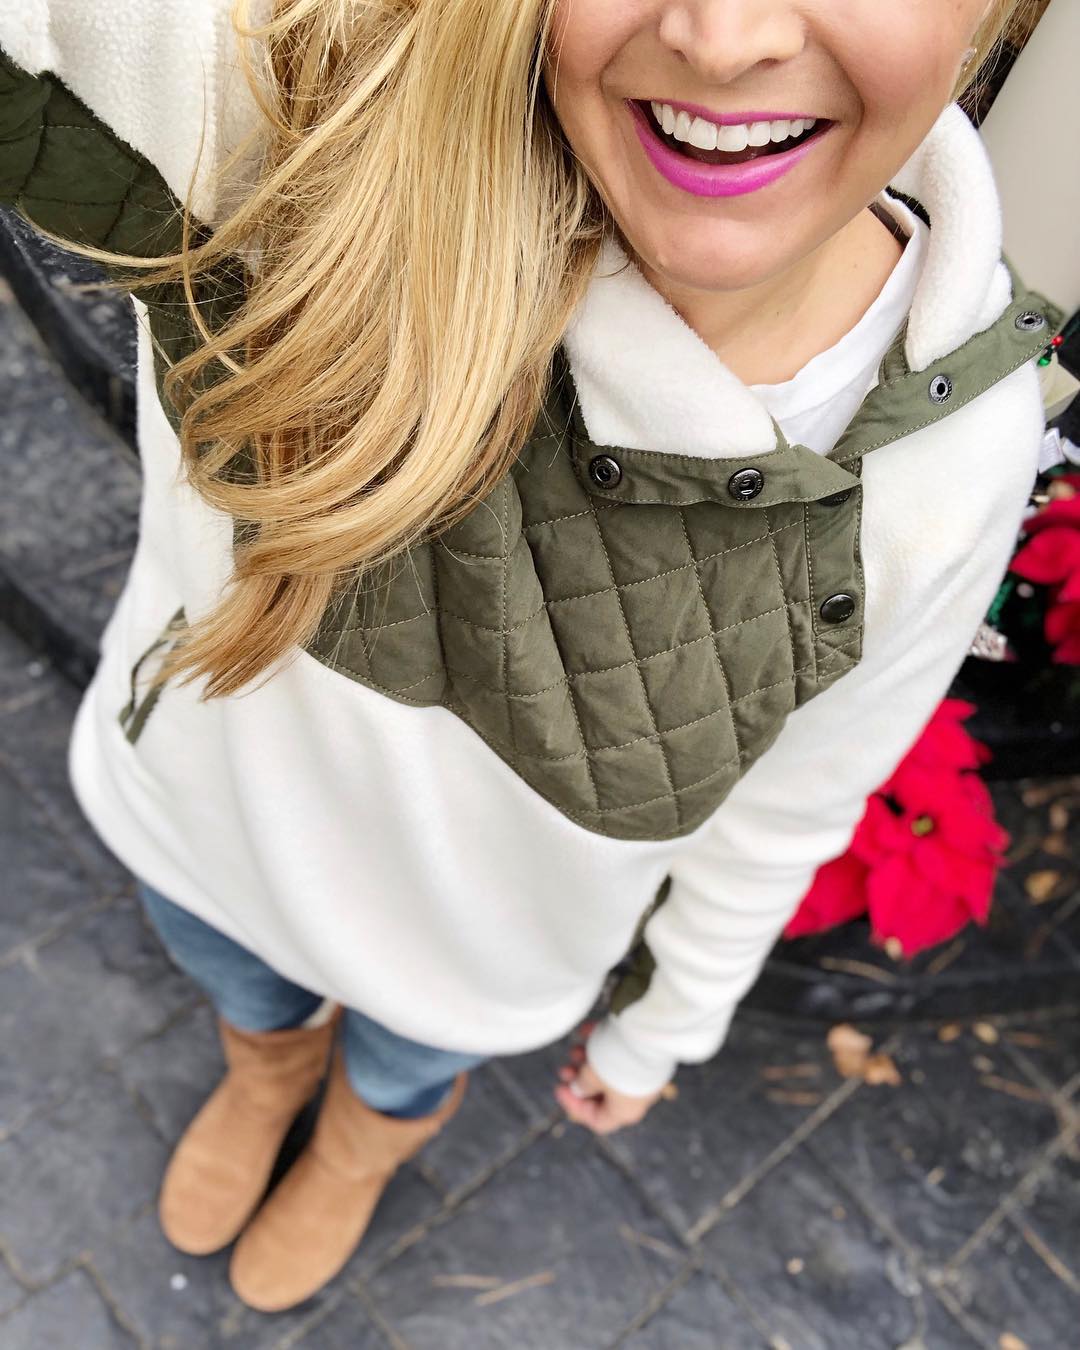 Friday Favorites featured by popular Houston fashion blogger, Fancy Ashley: fall outfit